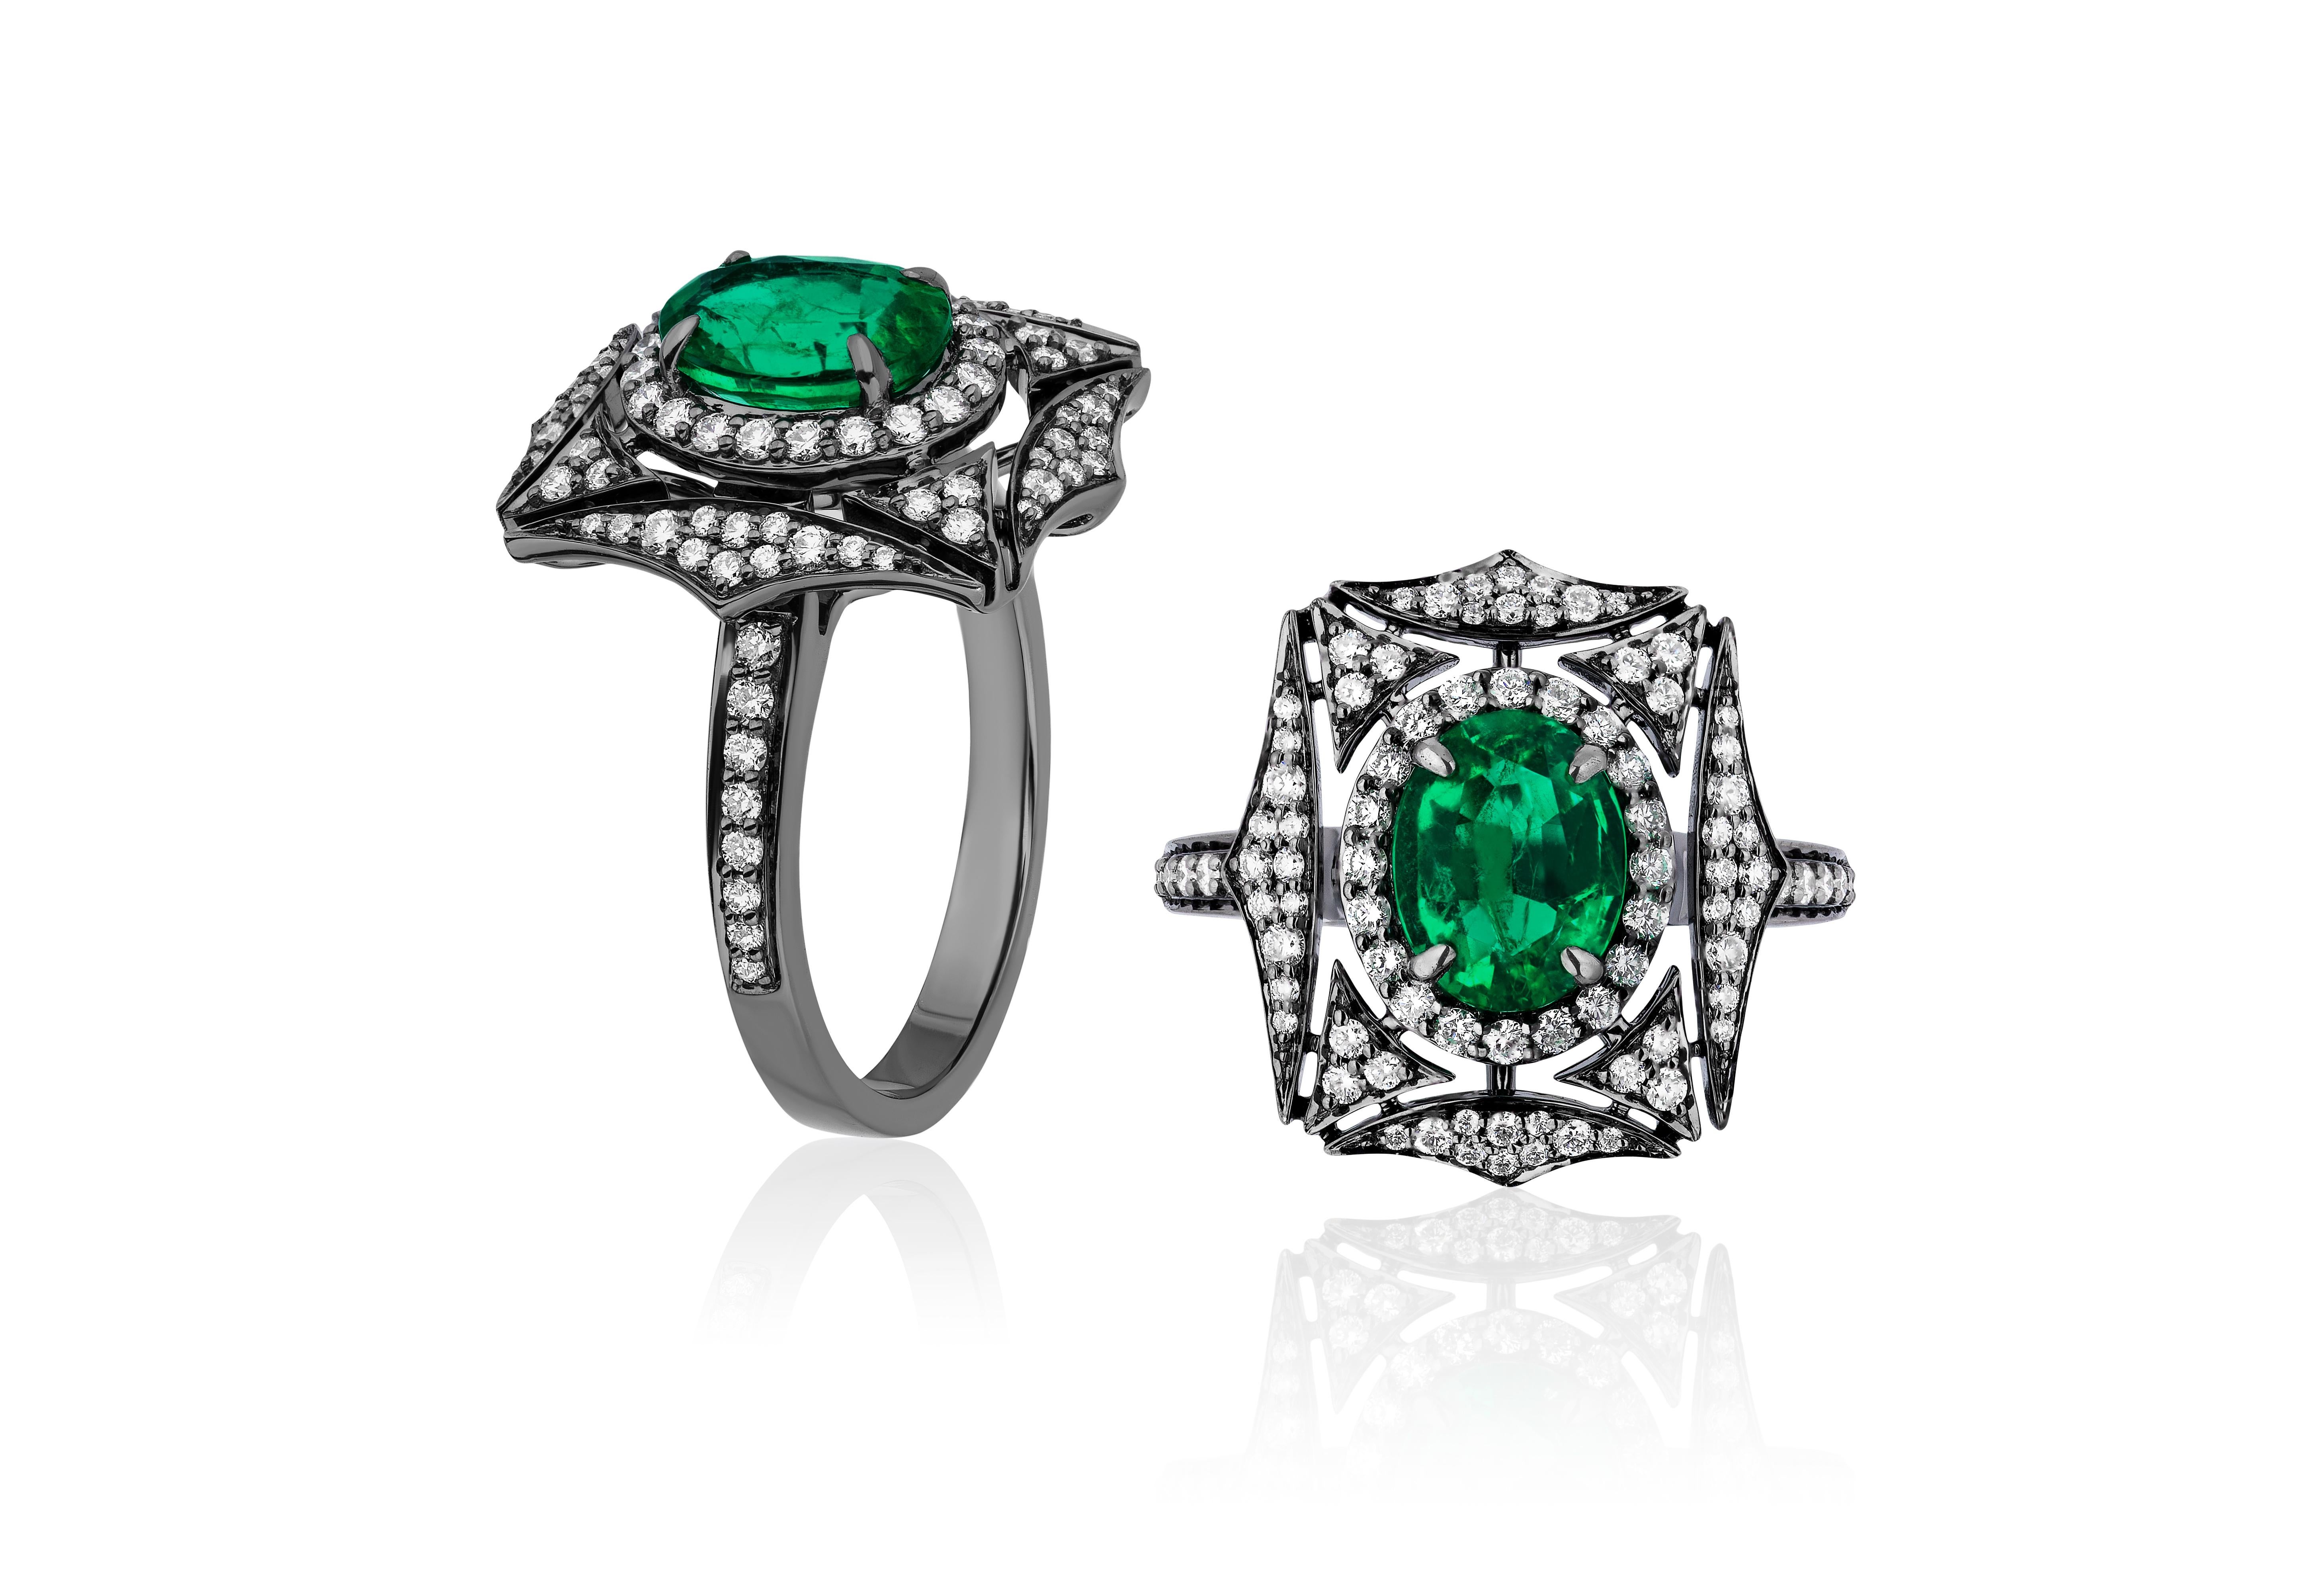 This beautiful Faceted Emerald and Diamond Web Ring in 18K White Gold with Black Rhodium, from 'G-One' Collection is an outstanding piece of jewelry to have in your personal collection.

* Stone Size: 11 x 9 mm
* Gemstone: 100% Earth Mined 
*